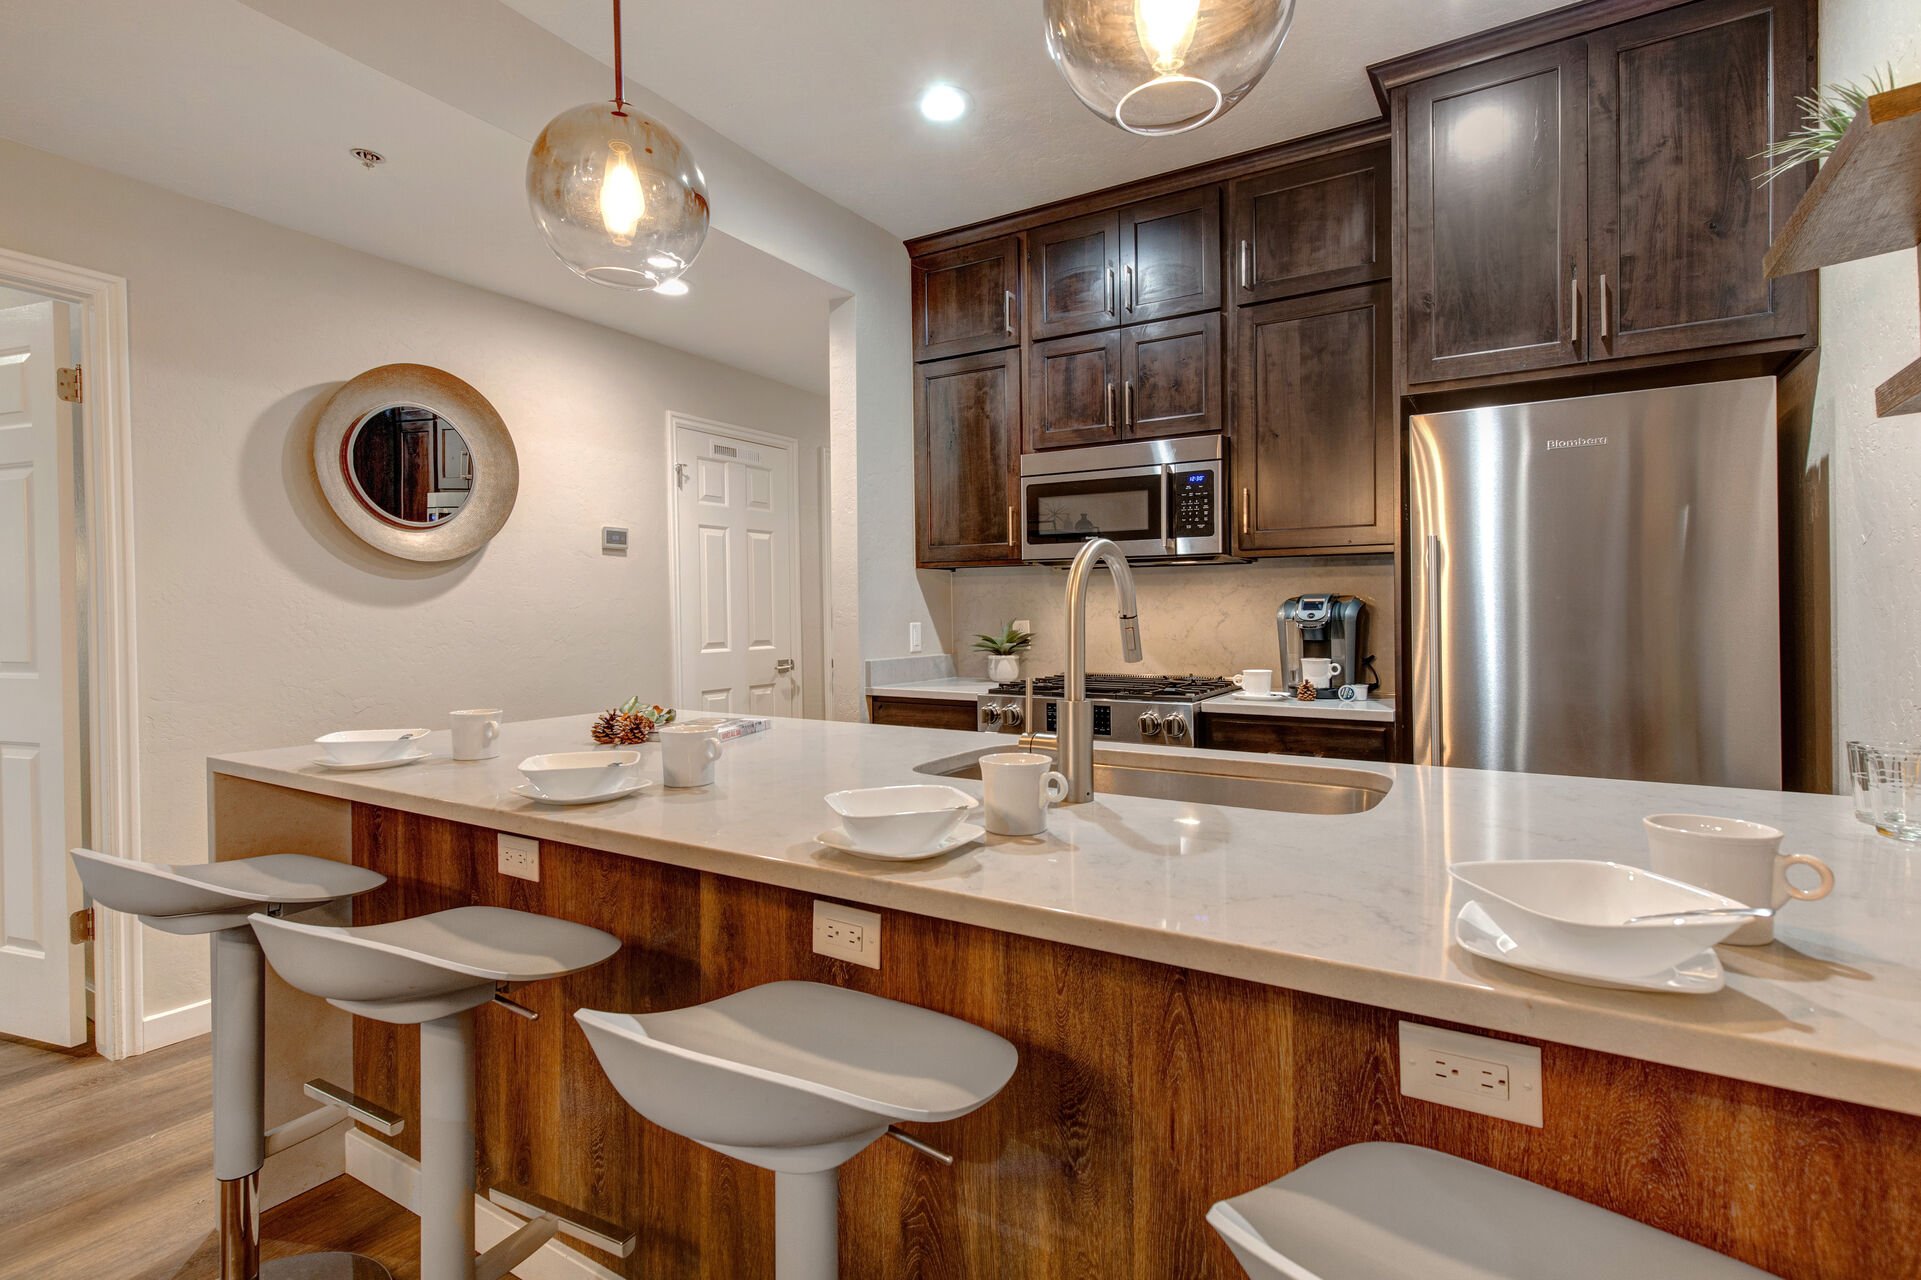 Fully Equipped Kitchen with gorgeous stone countertops, stainless steel appliances, and bar seating for four